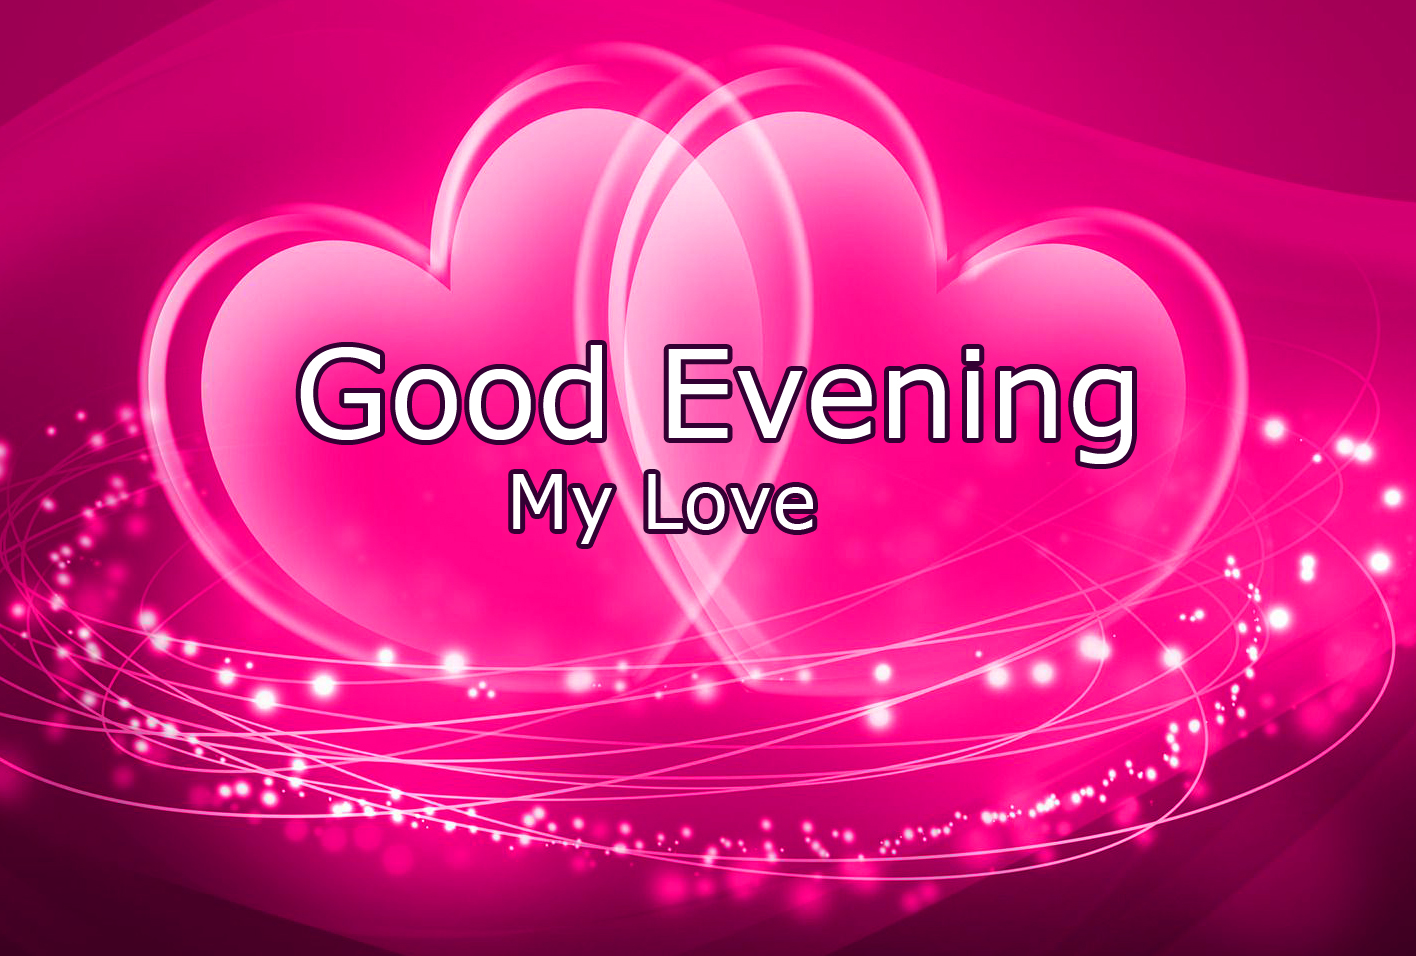 Romantic Good Evening Messages For Her - 2023